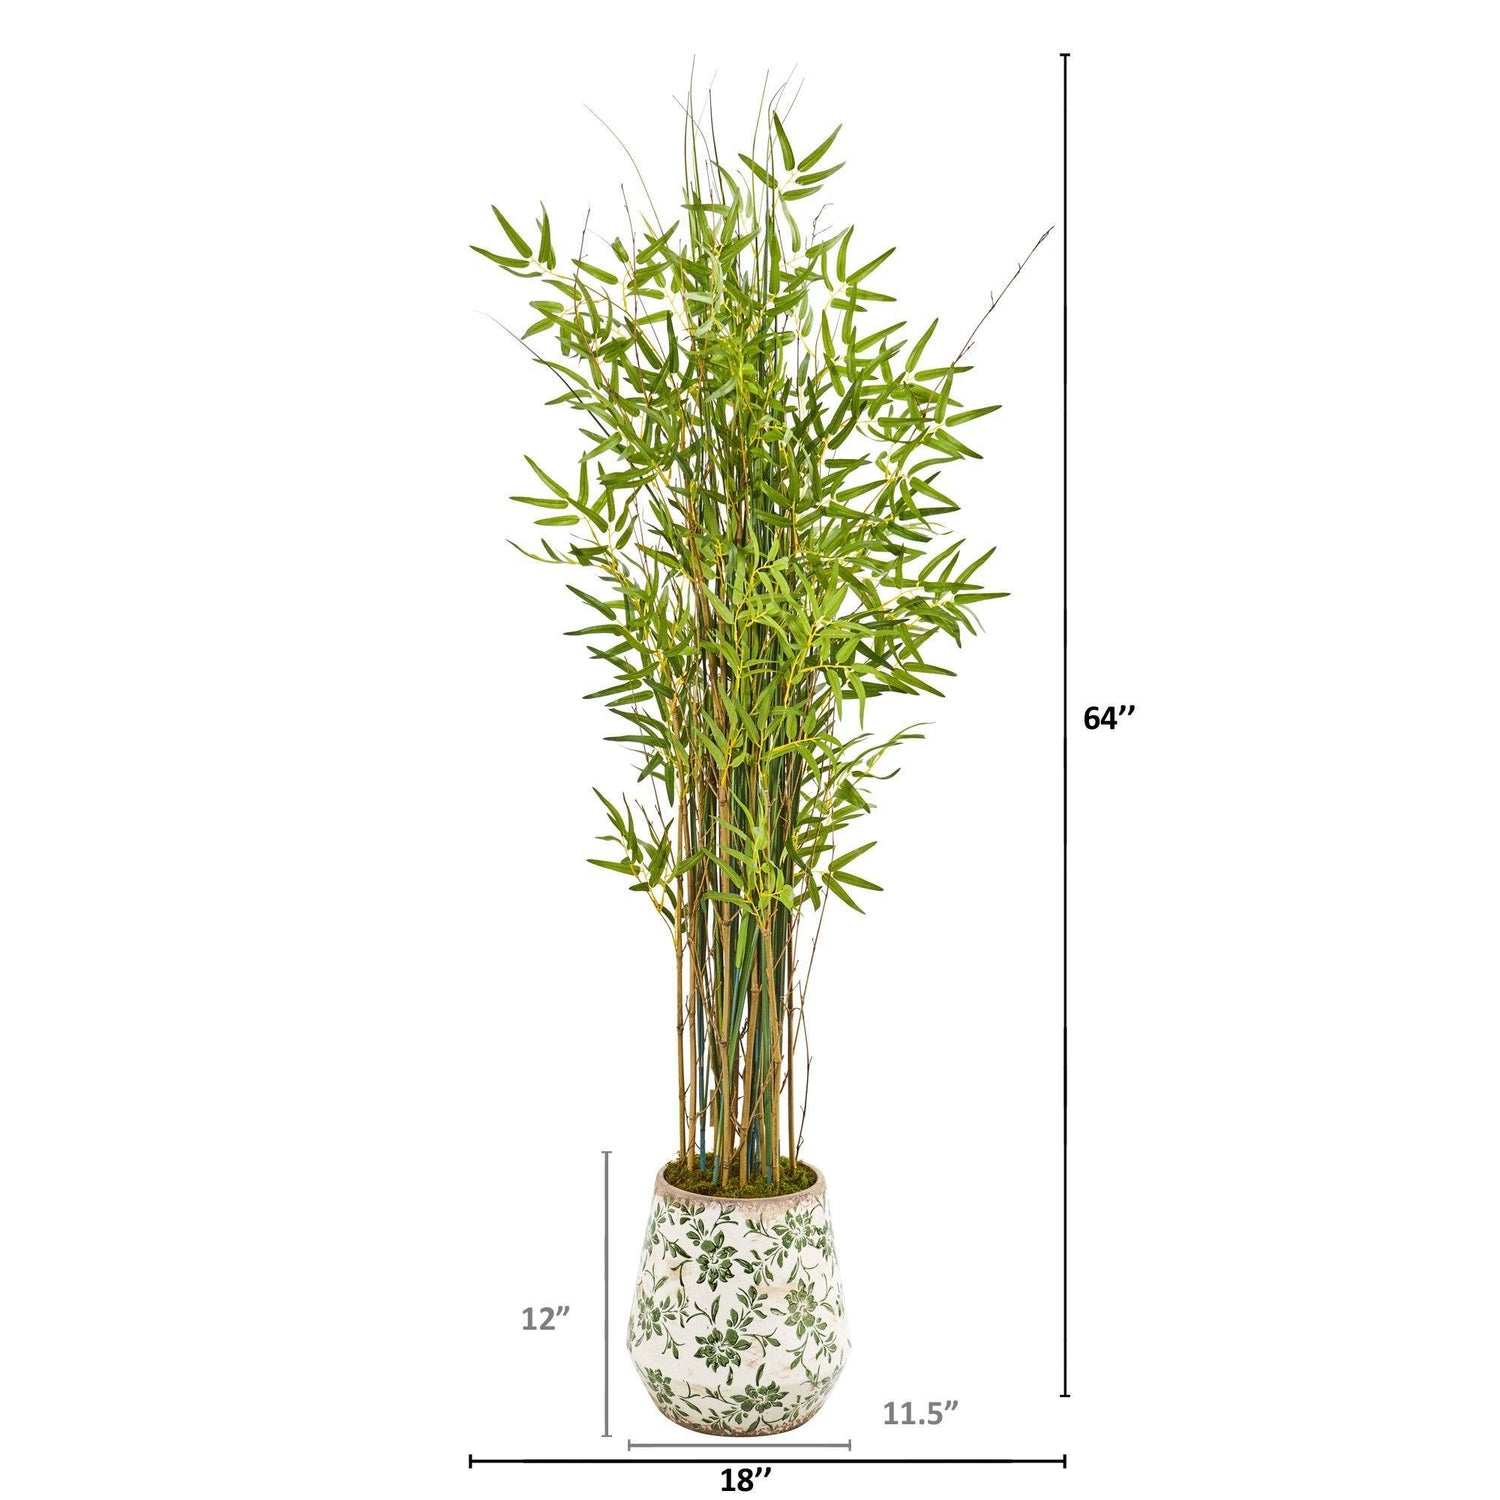 64” Grass Artificial Bamboo Plant in Floral Print Planter